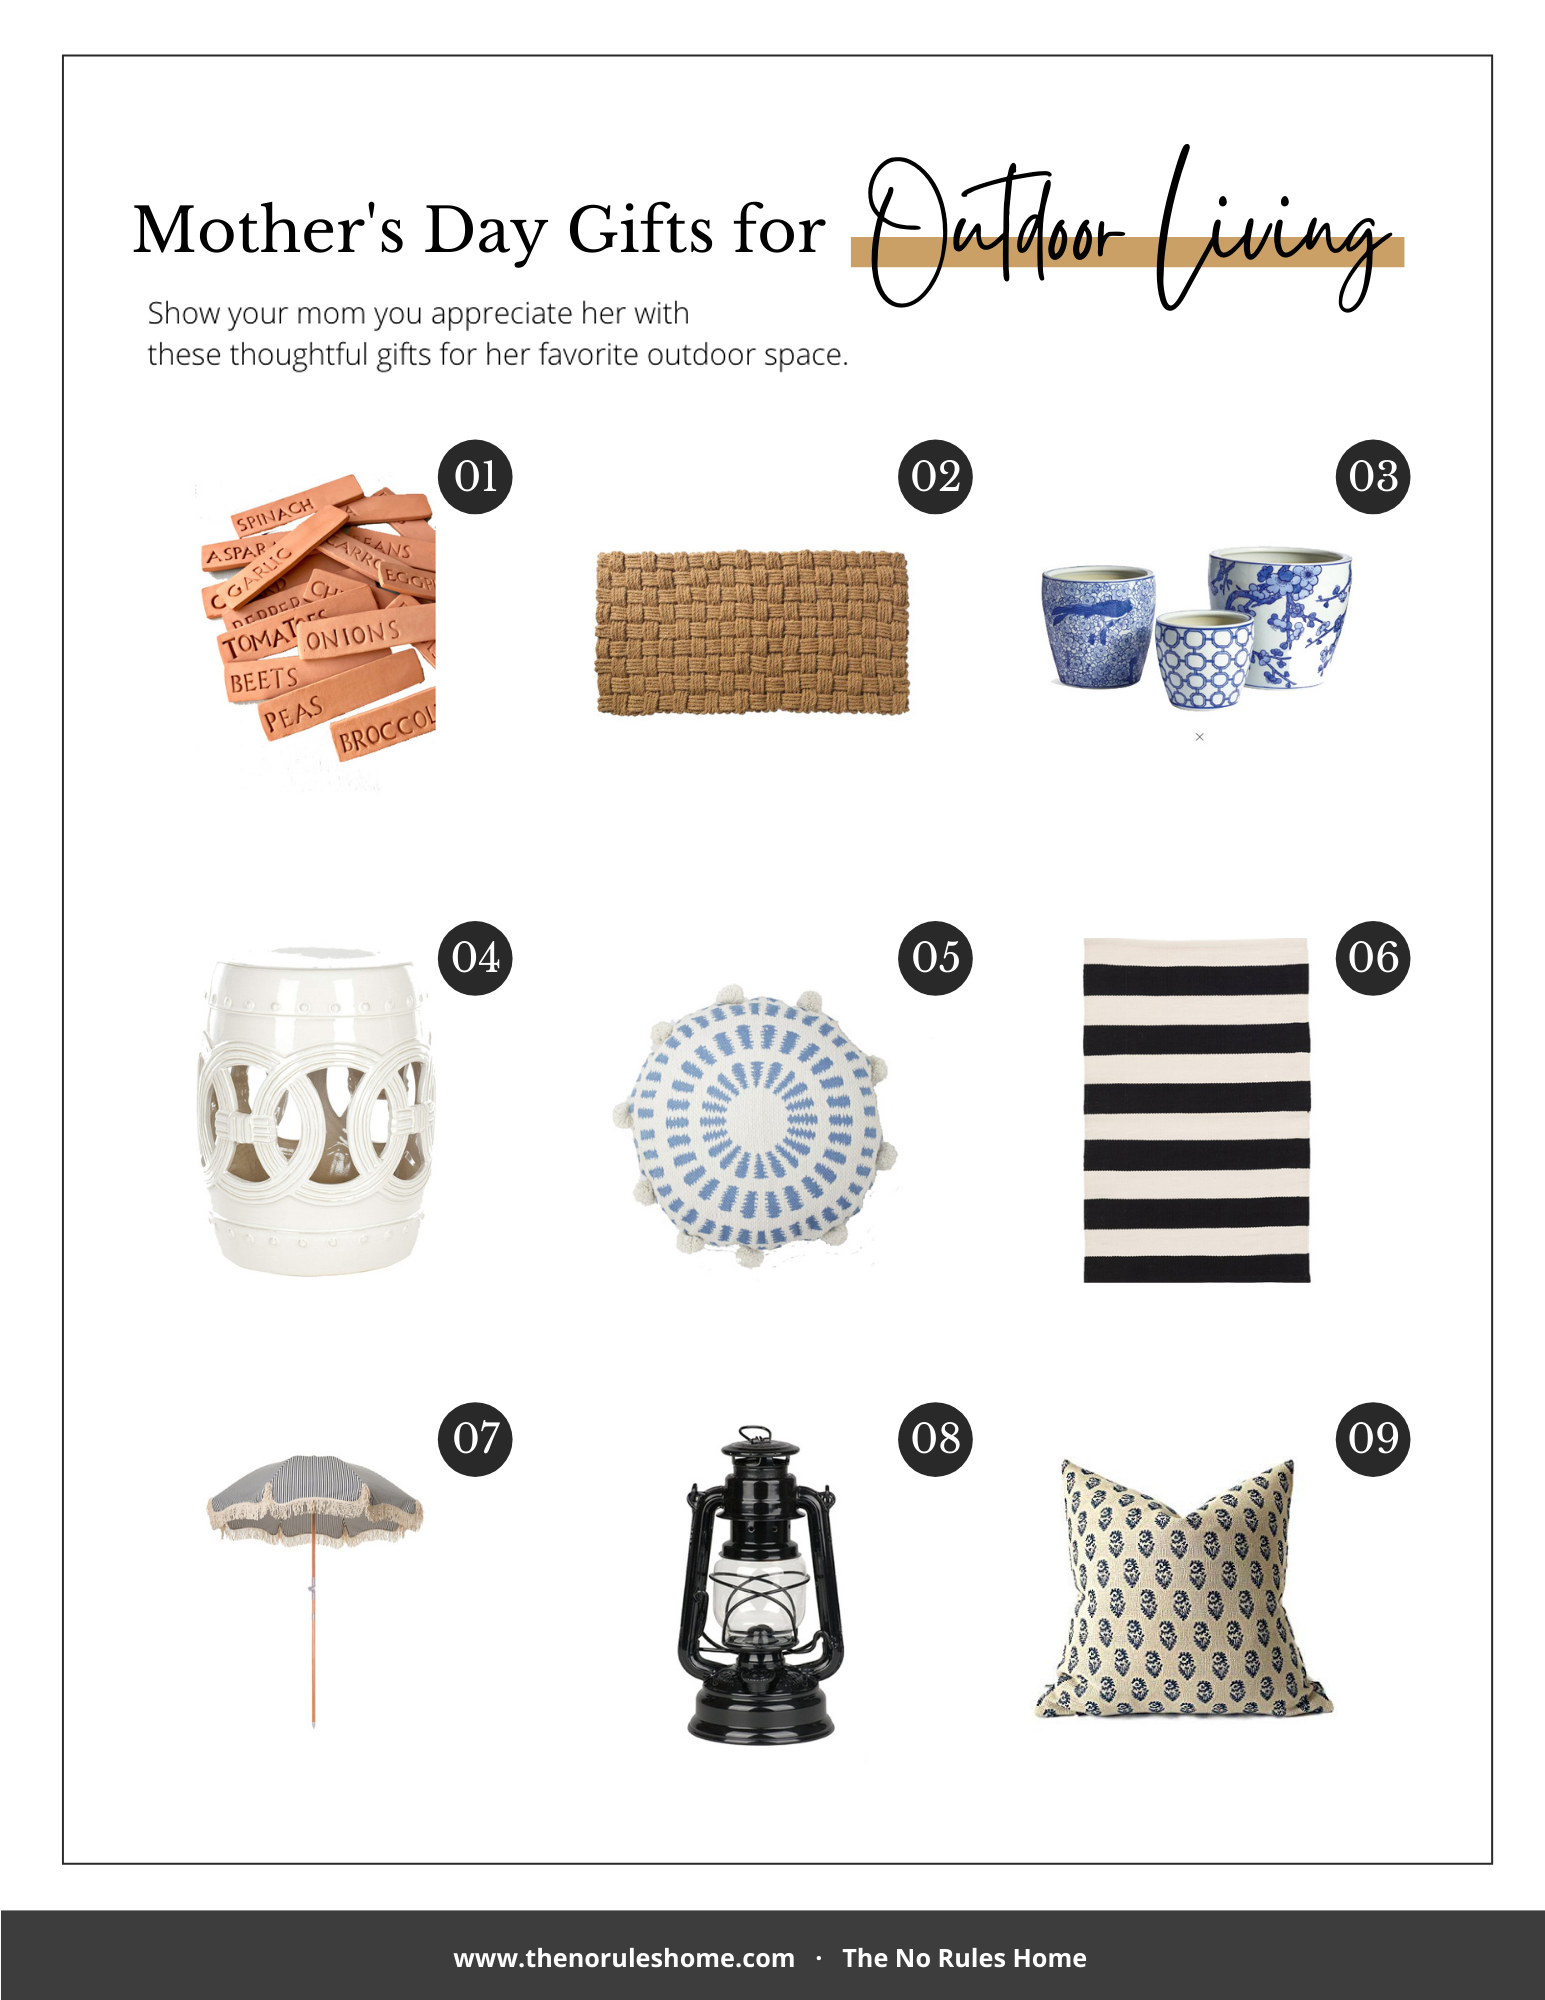 Mother's Day gift guide 2021